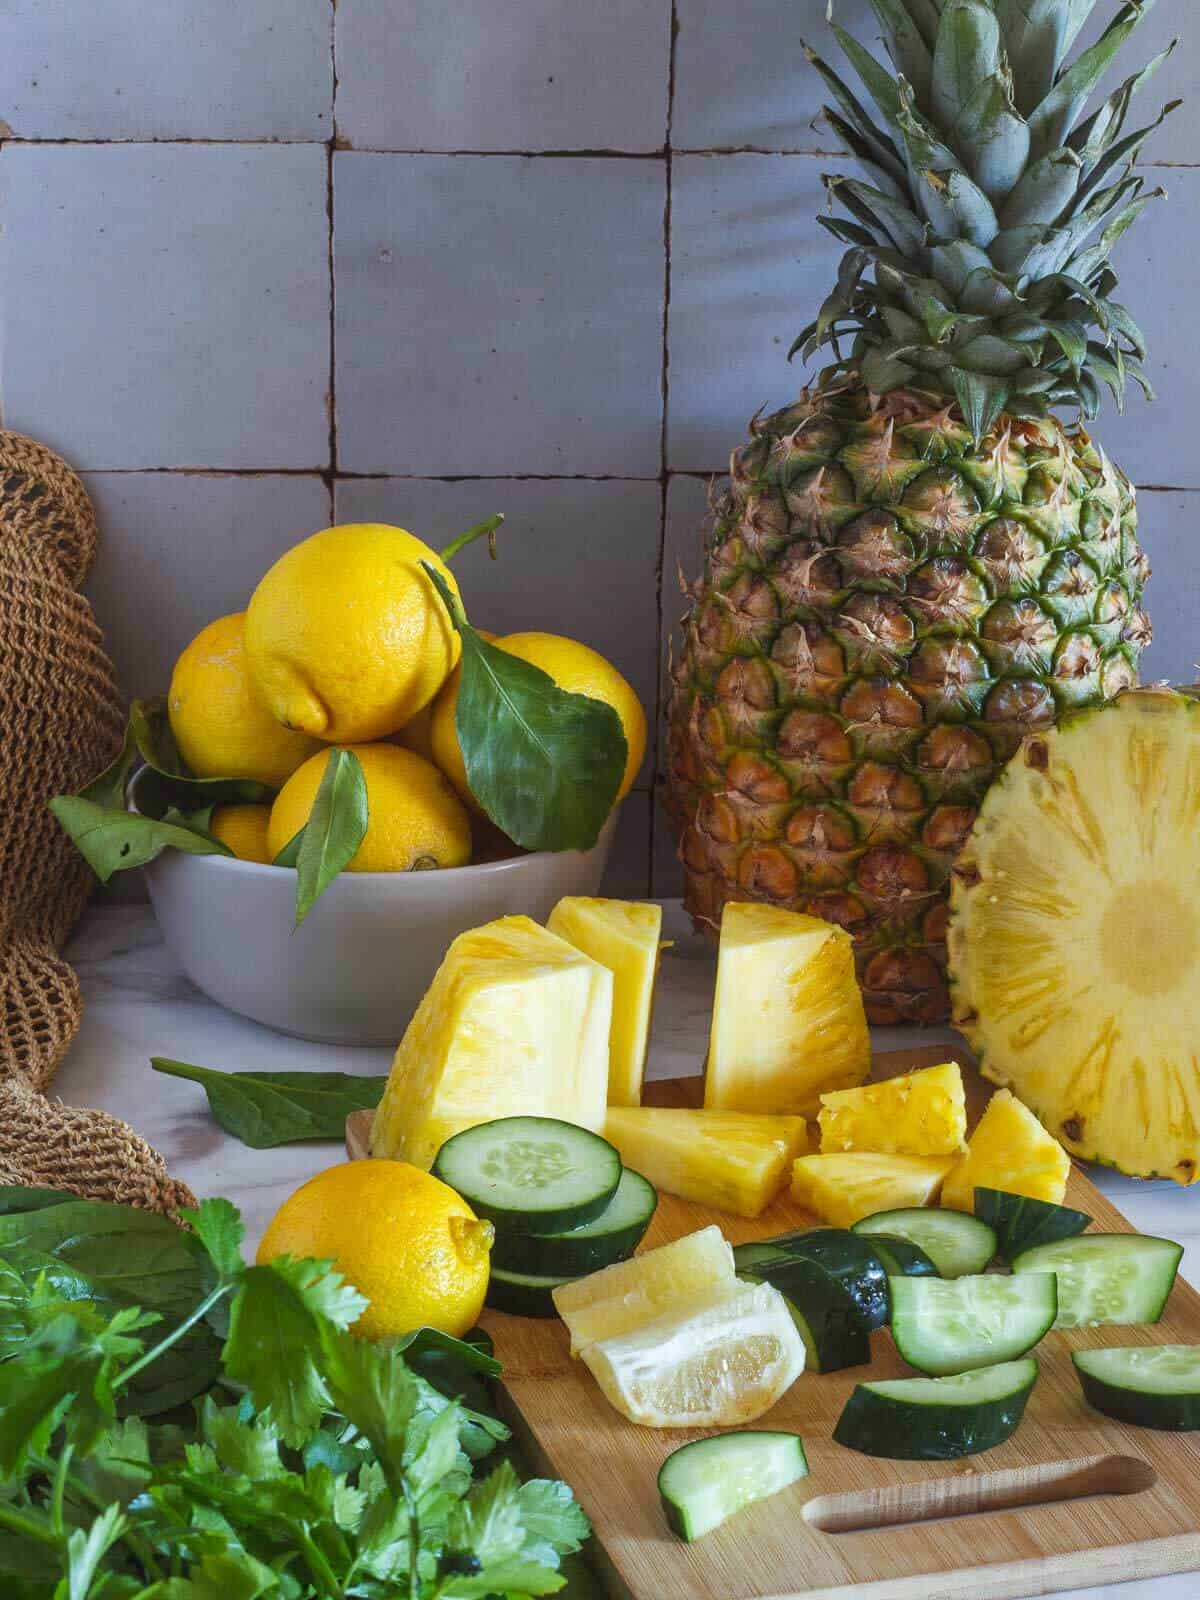 chop all ingredients for pineapple and cucumber cleanse juice